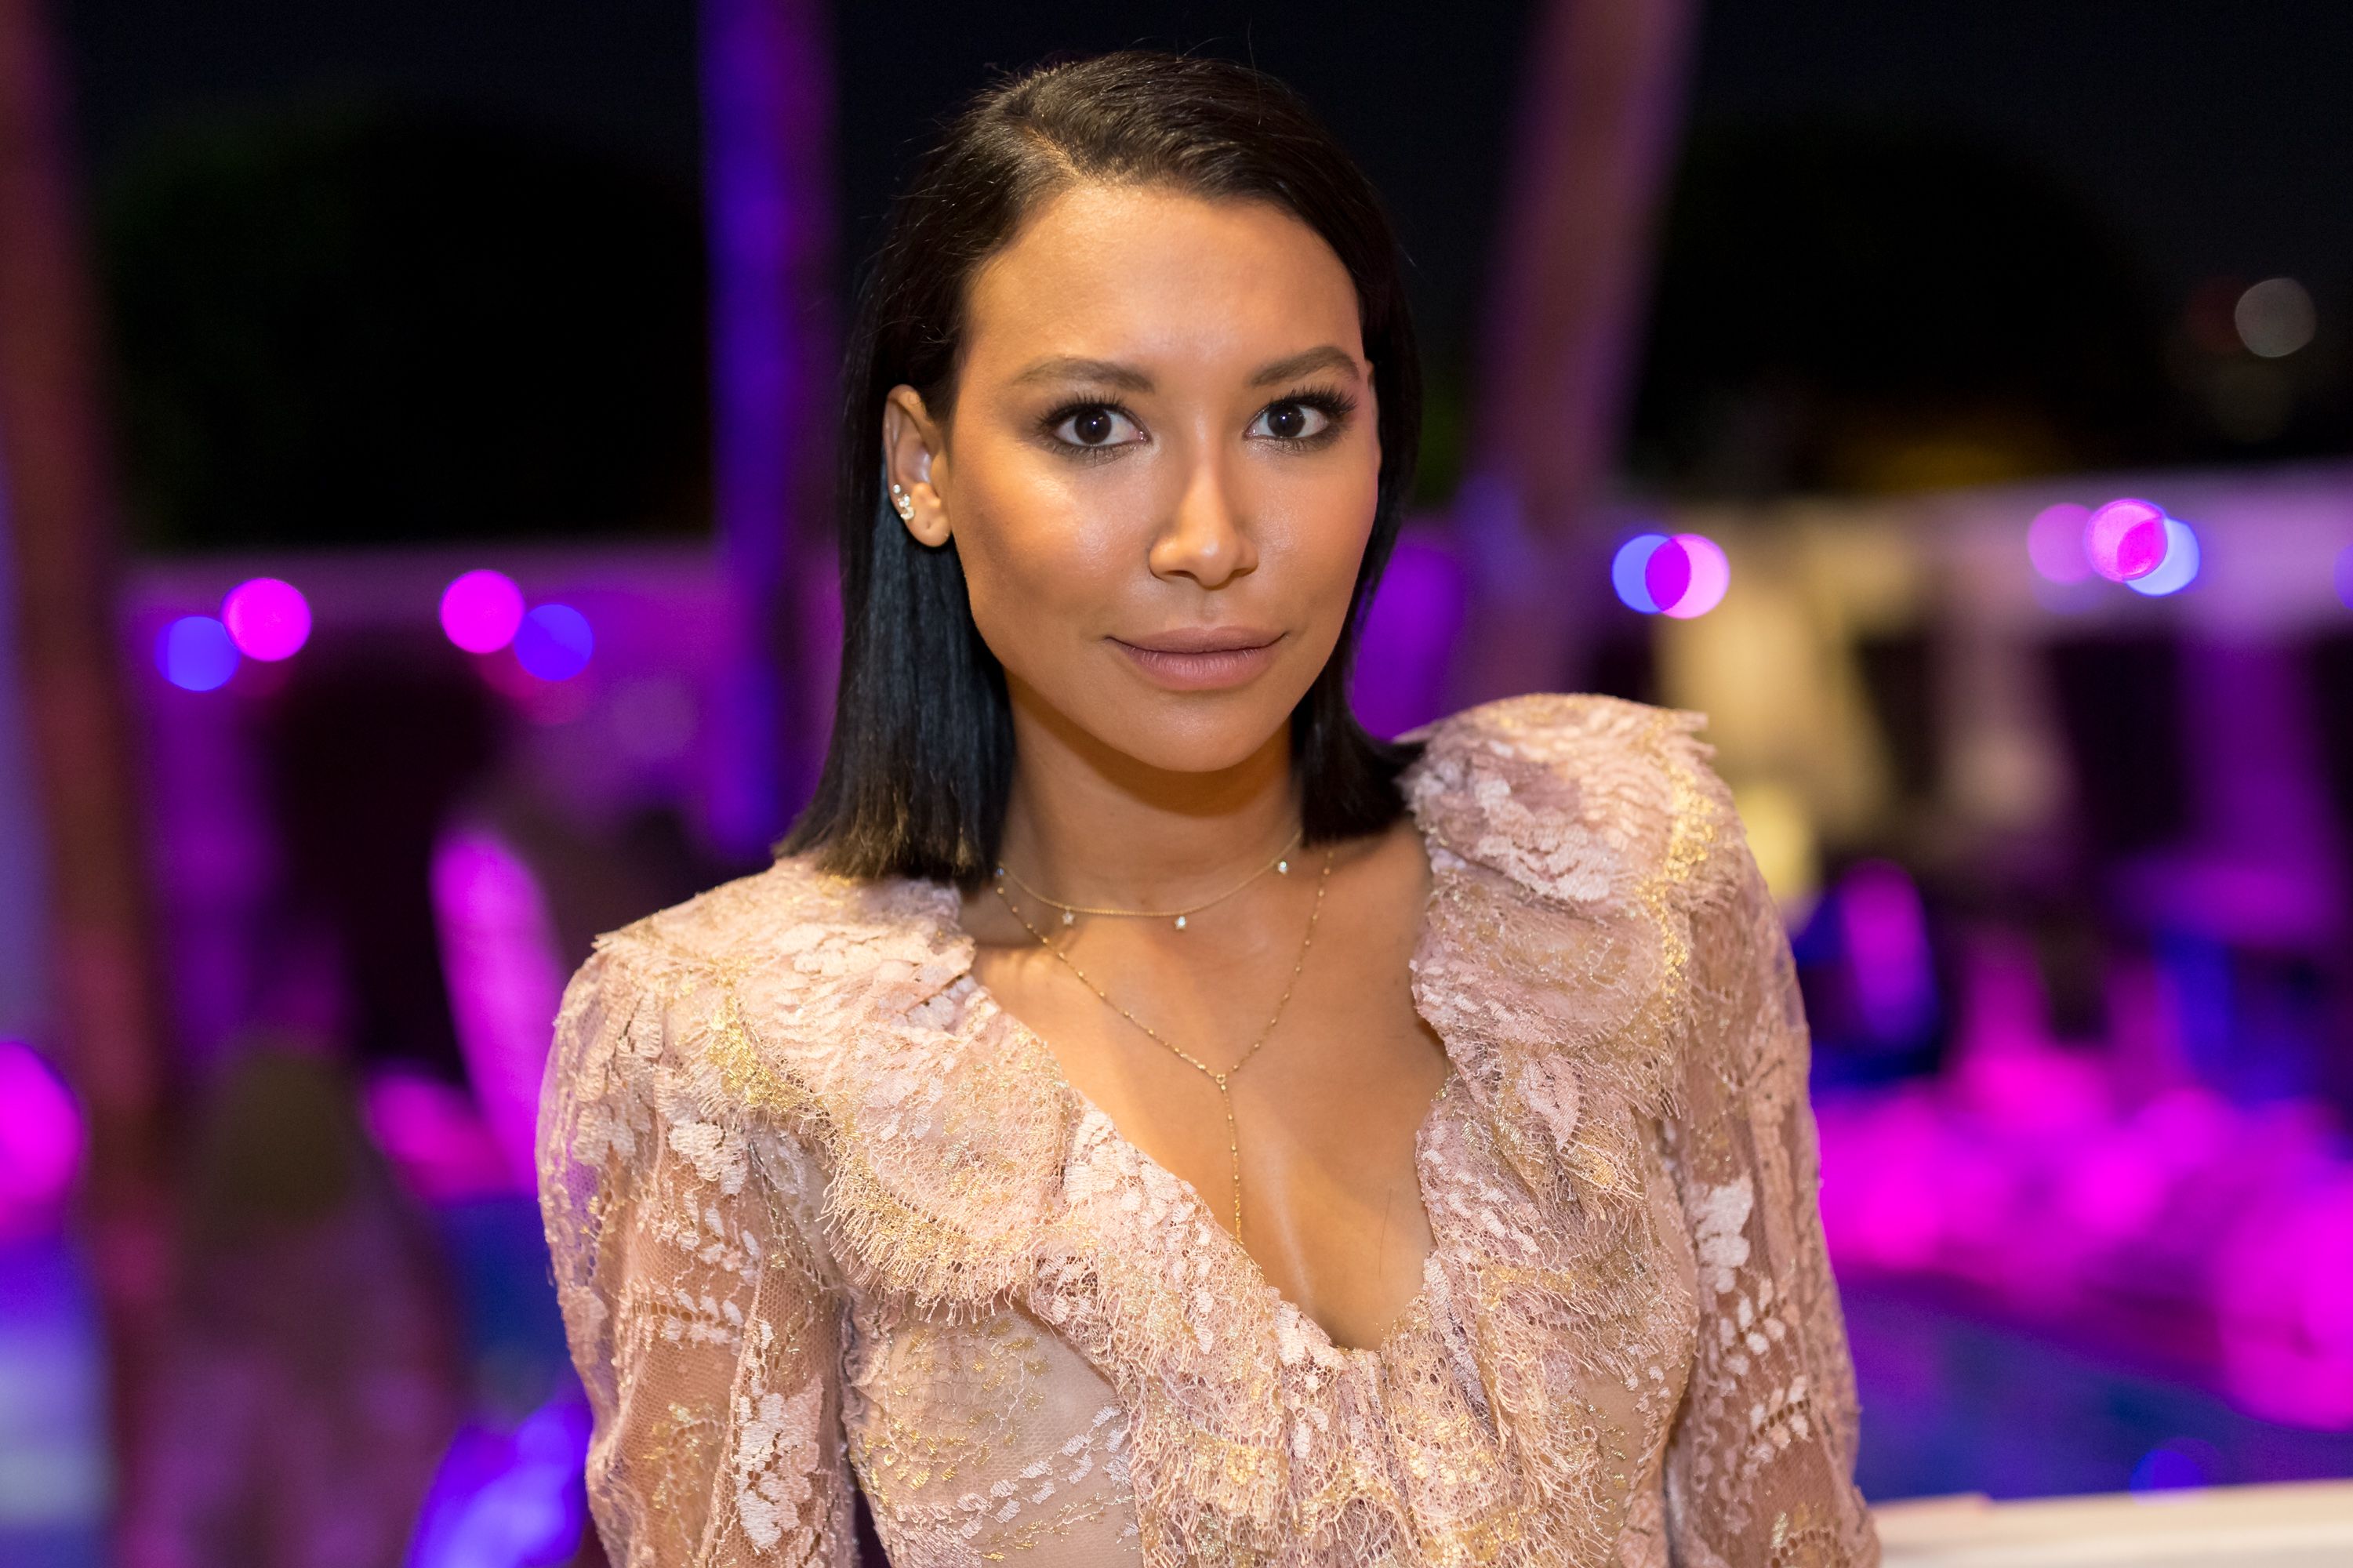 Actress Naya Rivera at the Point Honors Los Angeles at The Beverly Hilton Hotel on October 7, 2017 in Beverly Hills, California | Photo: Getty Images